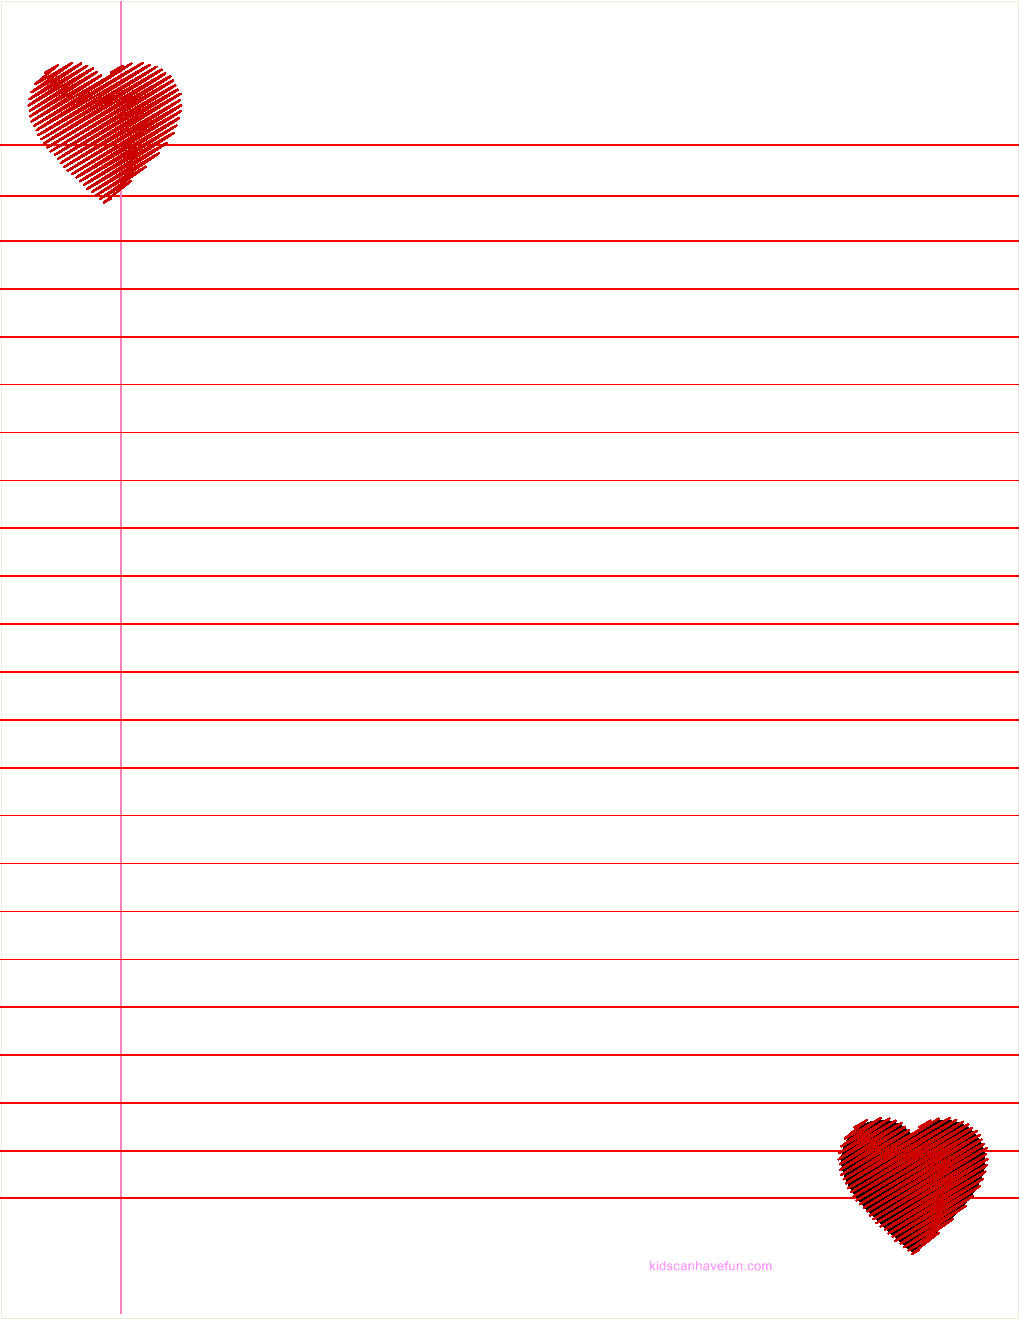 9 Best Images of Valentine's Day Printable Letter Stationary